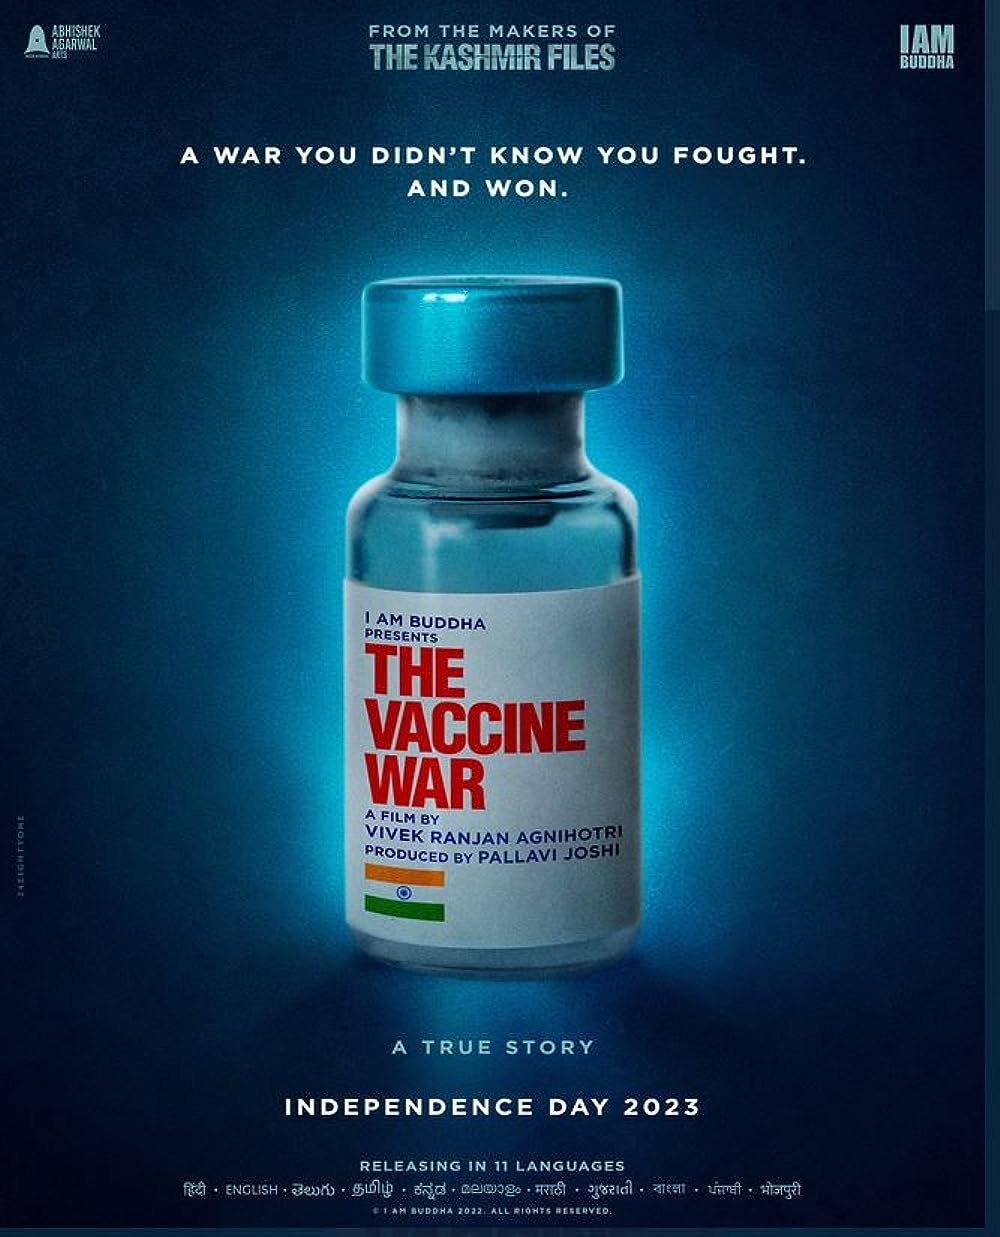 The Vaccine War (September 28): Vivek Agnihotri, director of The Kashmir Files, brings another true narrative to the big screen, this time based on India's war against COVID-19 and the medical department's efforts to tackle the worldwide problem.